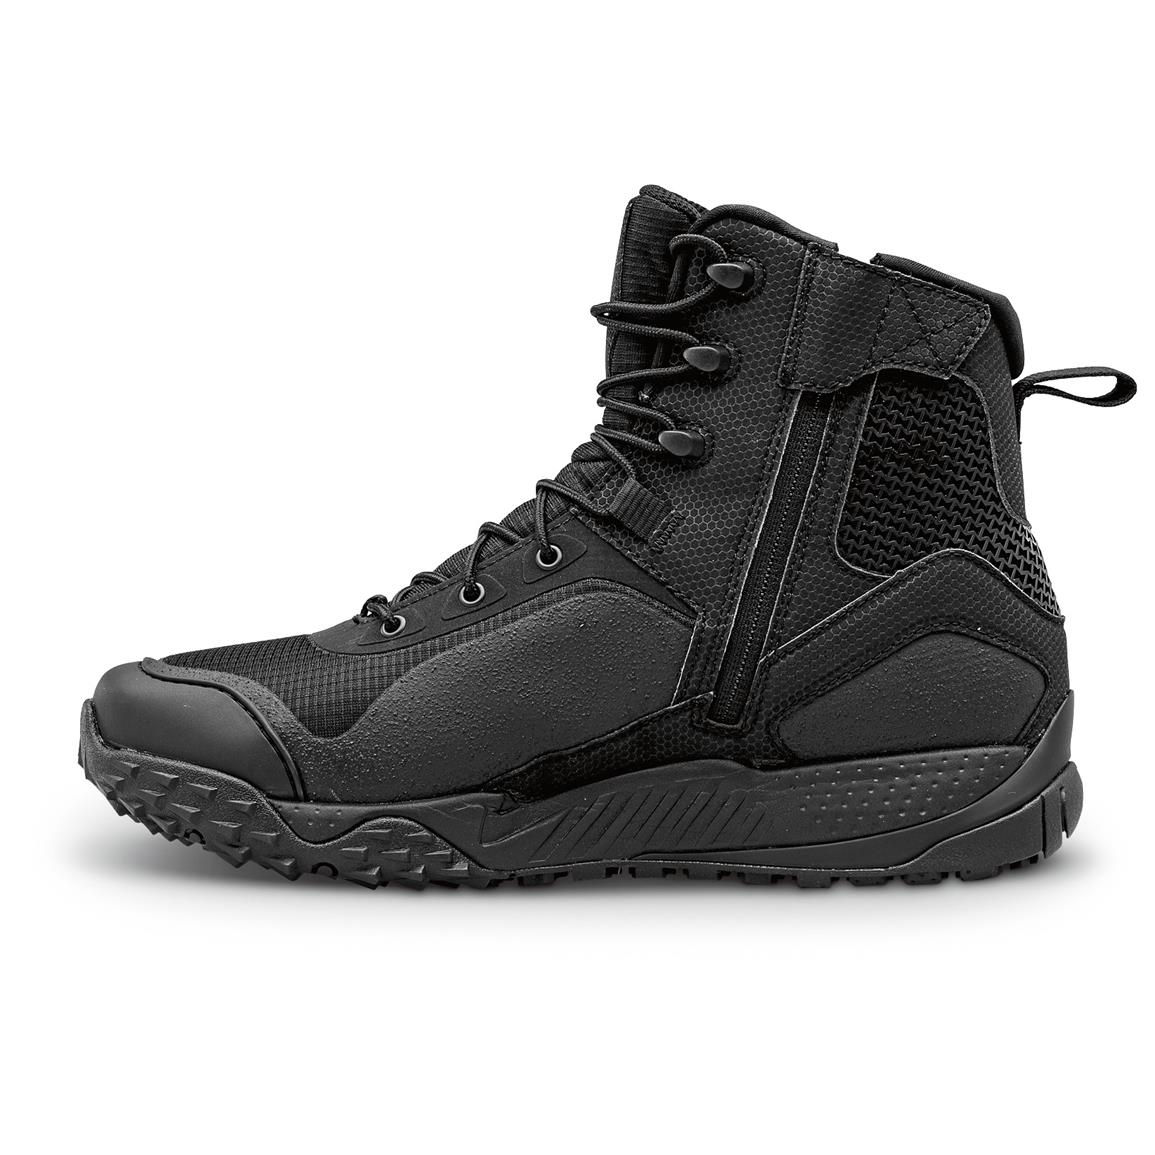 under armour work boots with zipper